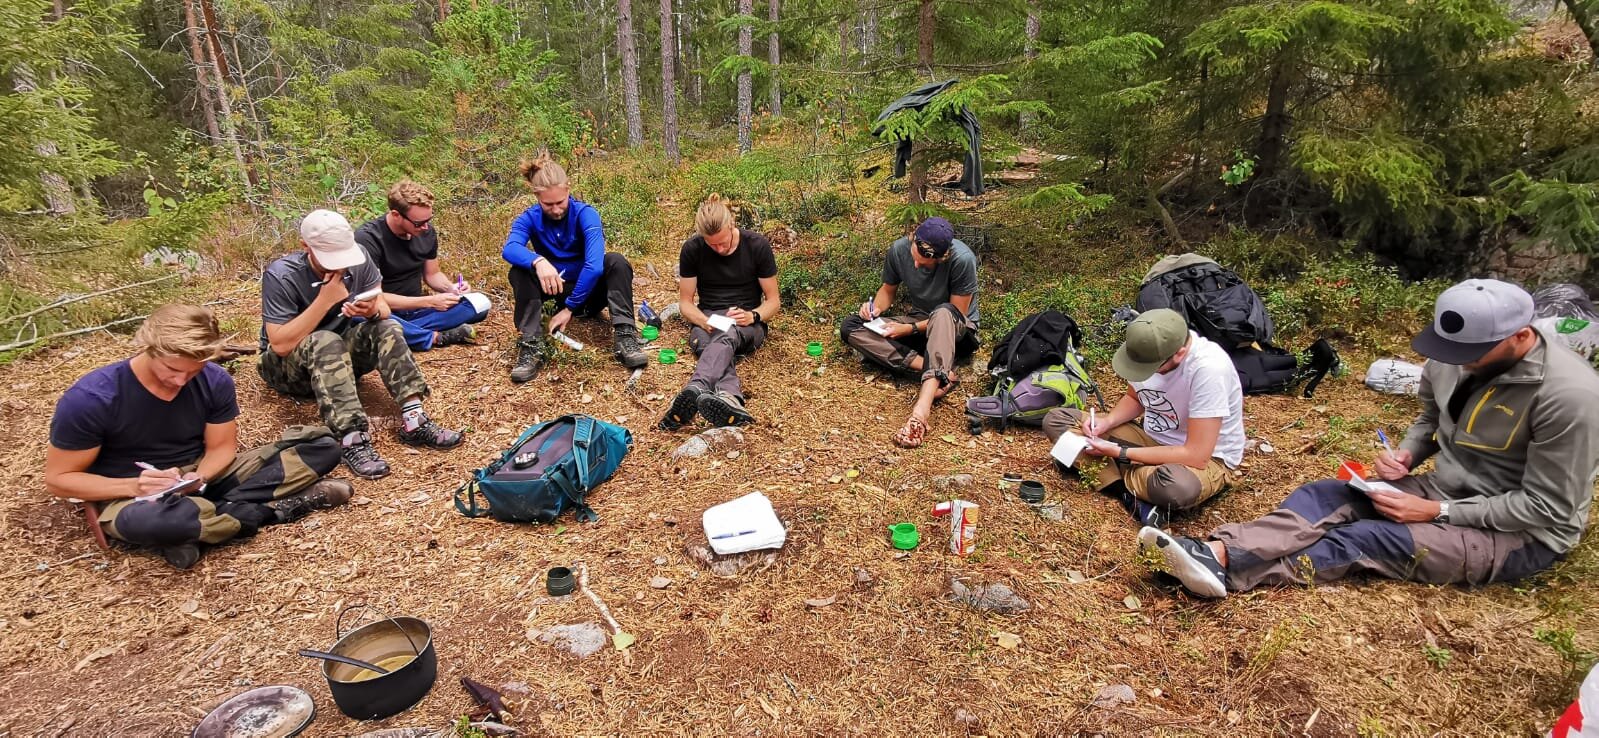 Wilderness Survival Training: Because What Could Possibly Go Wrong?